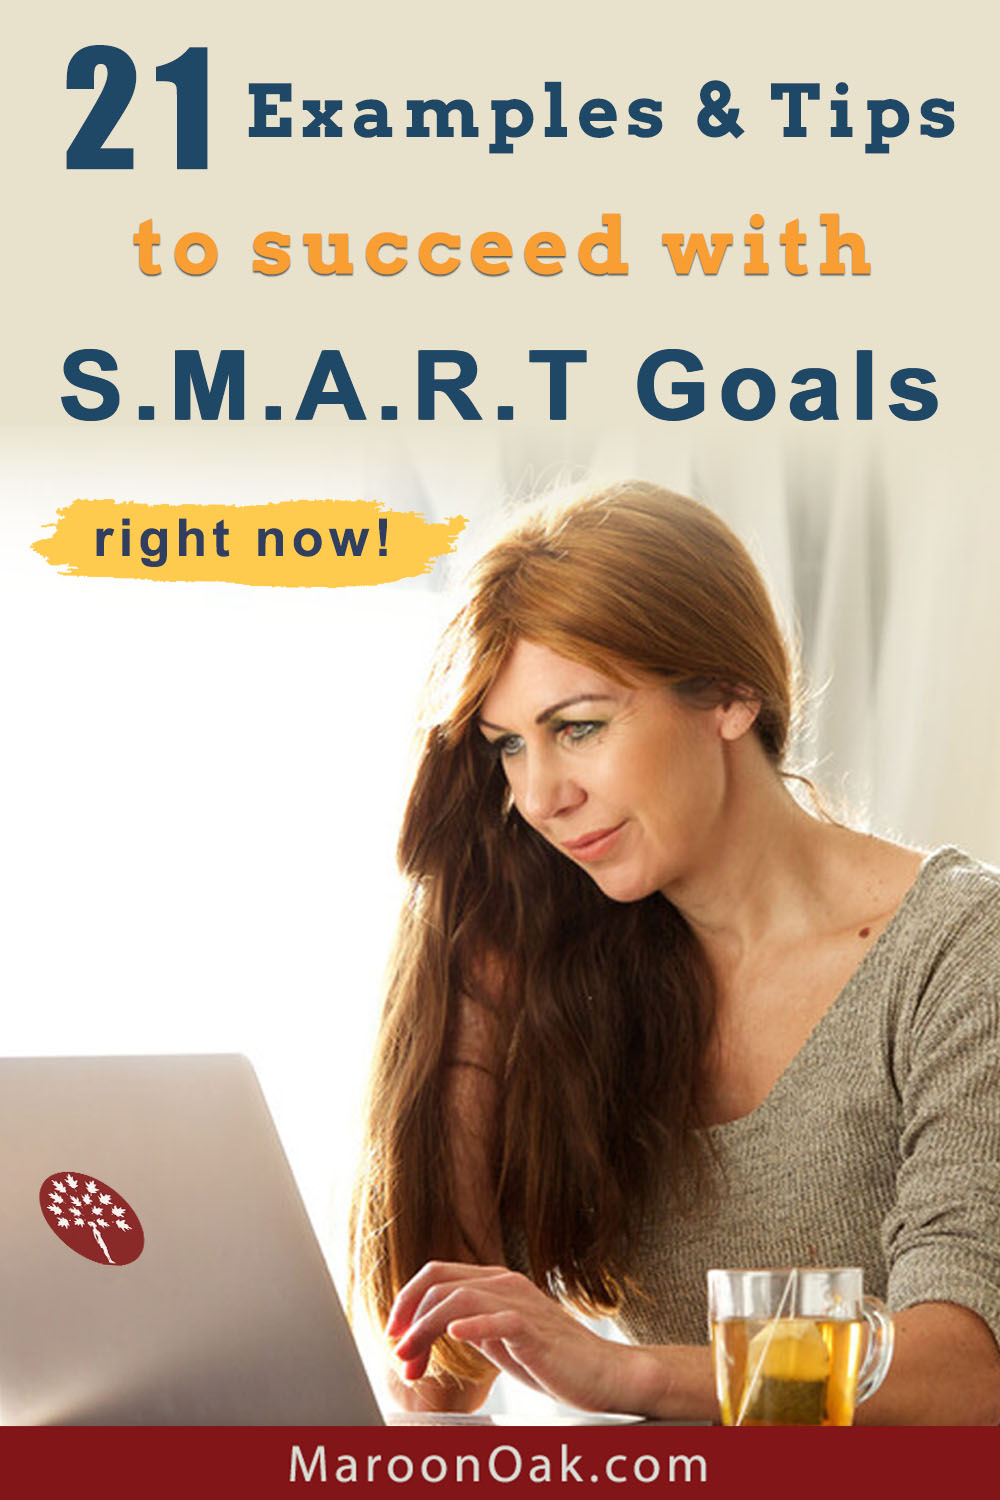 The biggest stumbling block to any kind of success are ideas that don’t convert into plans or actions. Learn how to embrace SMART #goals - choose and define your goals with clarity, and actually achieve them! Plus, tons of smart goal examples that you can apply in your work, business and life. #smartgoals